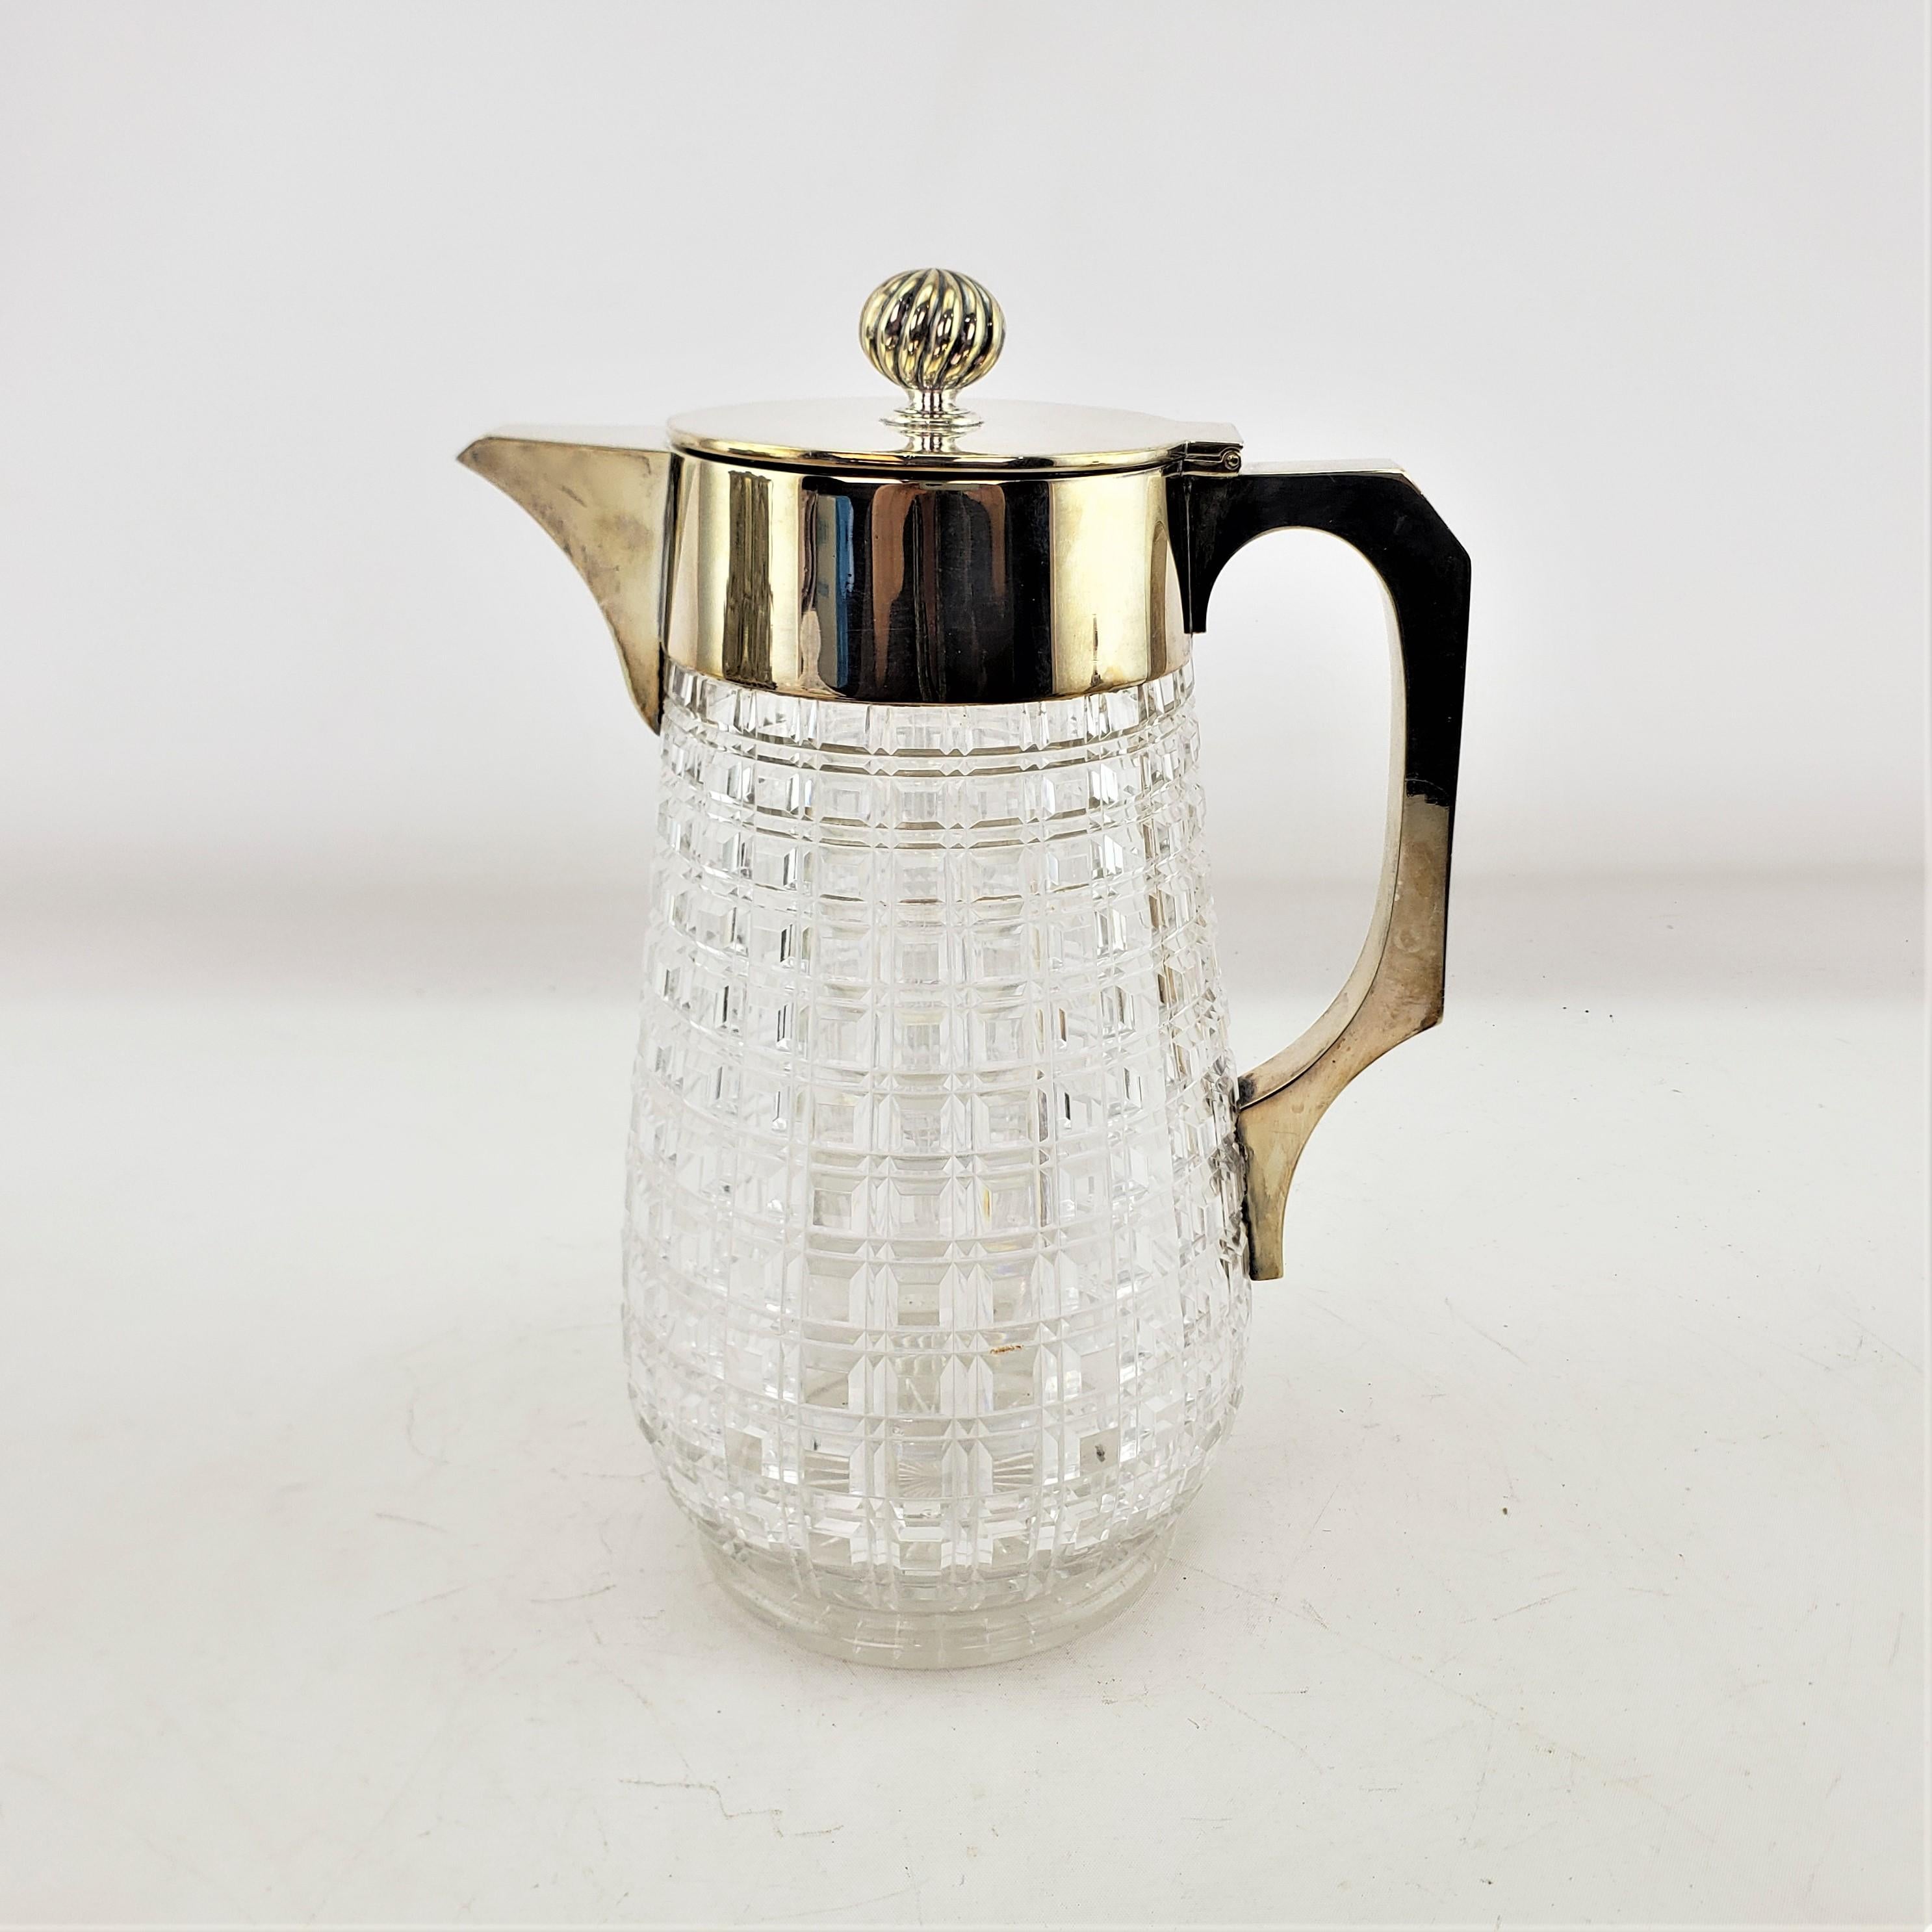 Antique Cut Crystal & Silver Plated Claret Jug or Decanter with Chiller Insert In Good Condition For Sale In Hamilton, Ontario